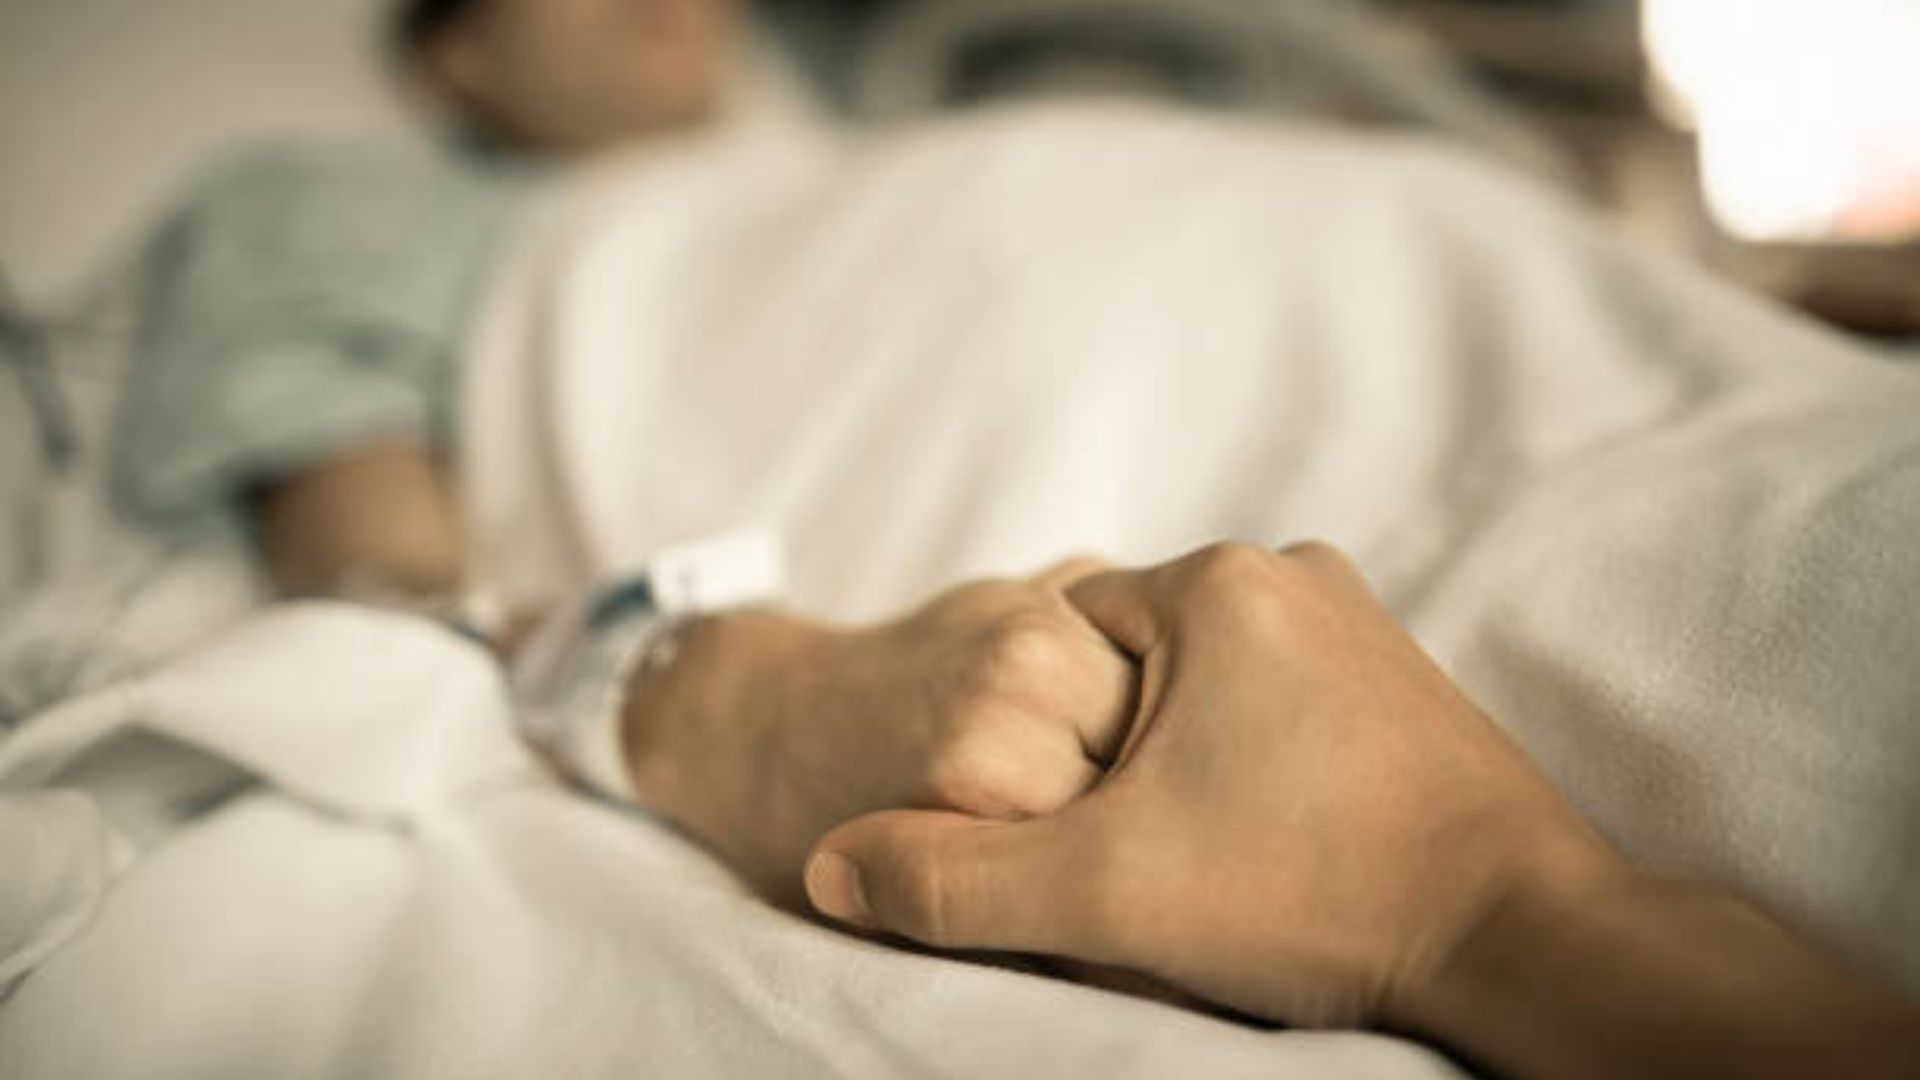 A Loved One Is Holding The Patient's Hands Tightly